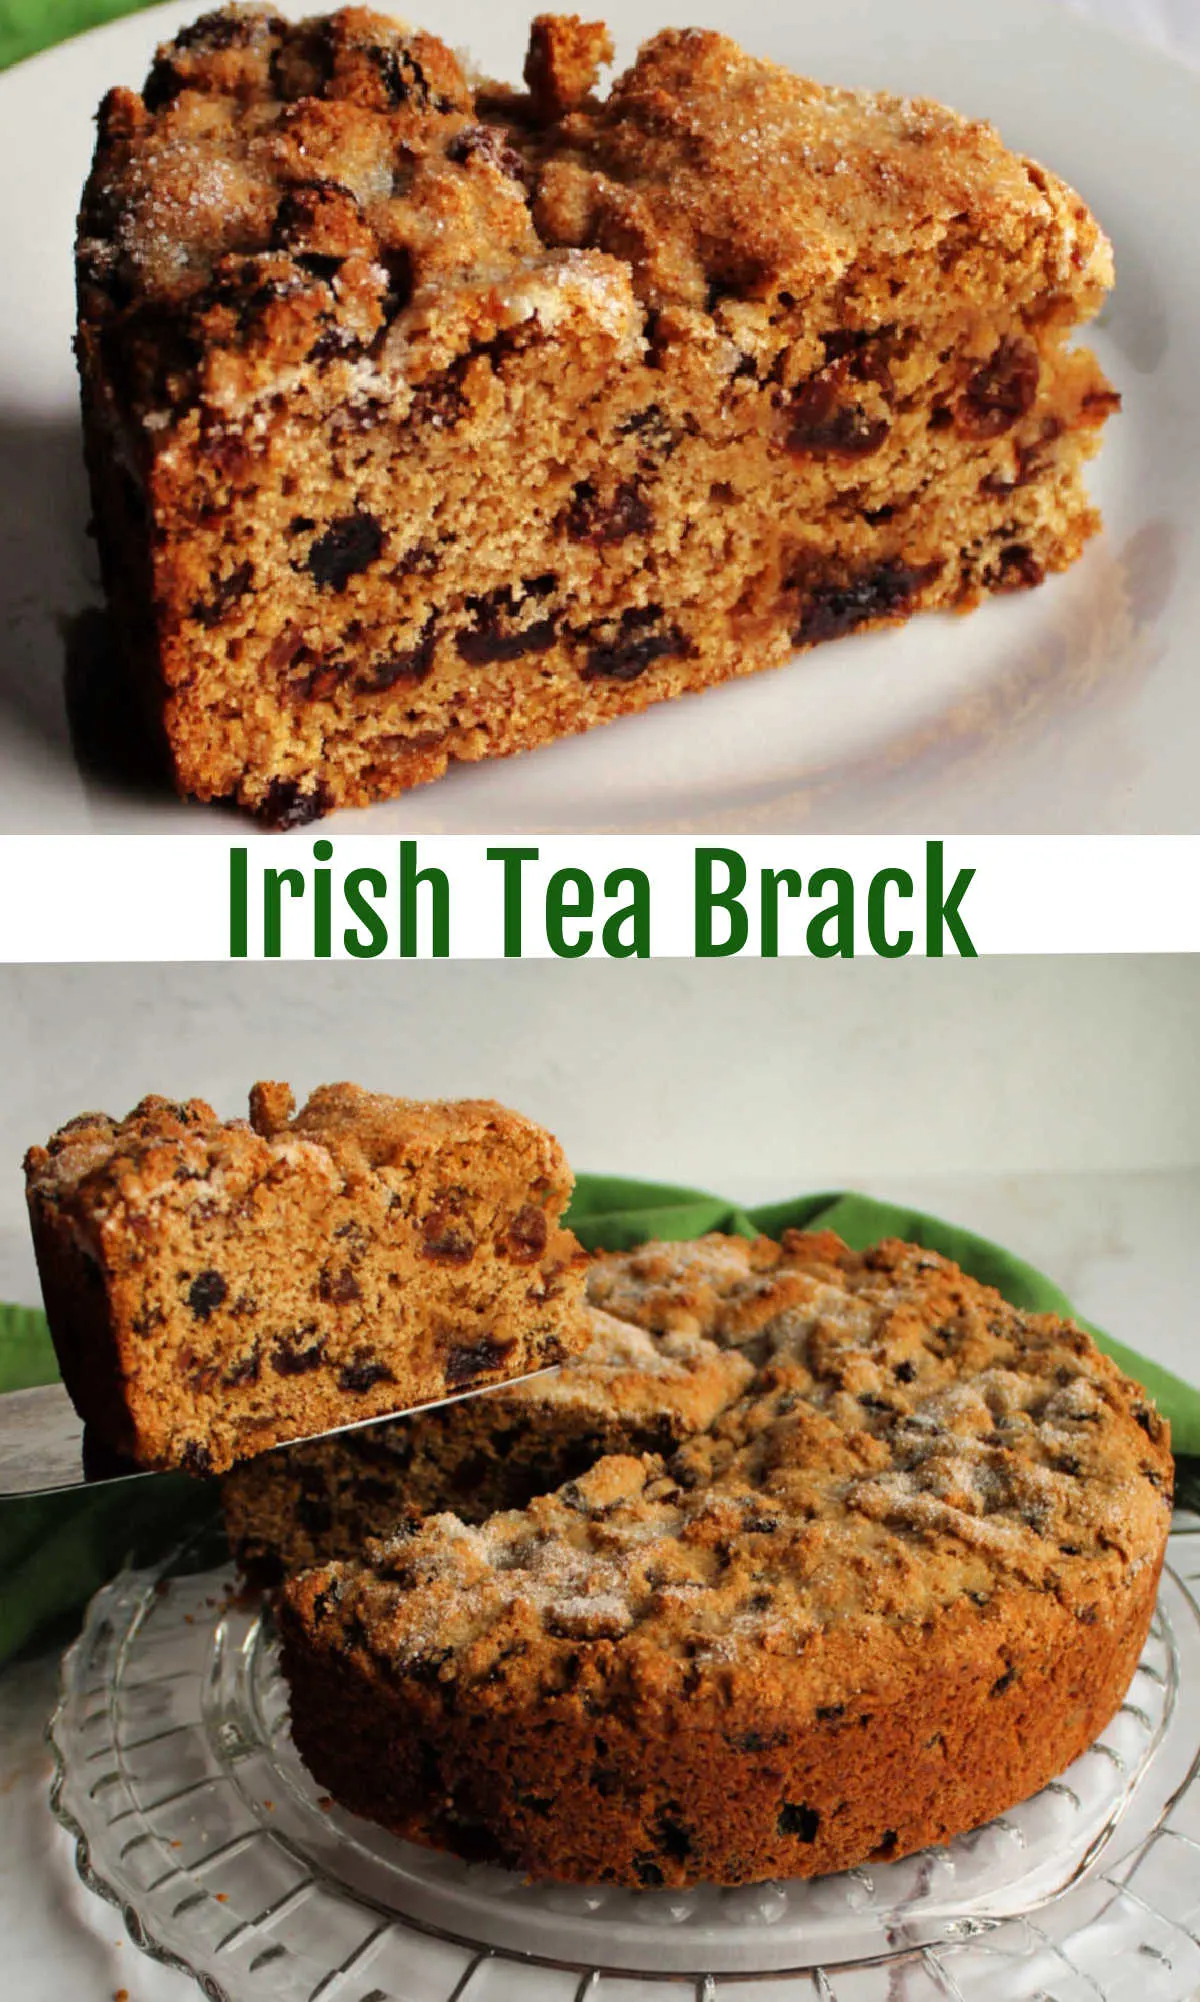 Tea soaked fruits are baked up in a whole wheat quick bread for a delicious breakfast or tea time treat. Irish tea brack is perfect for St Patrick’s Day or any day!